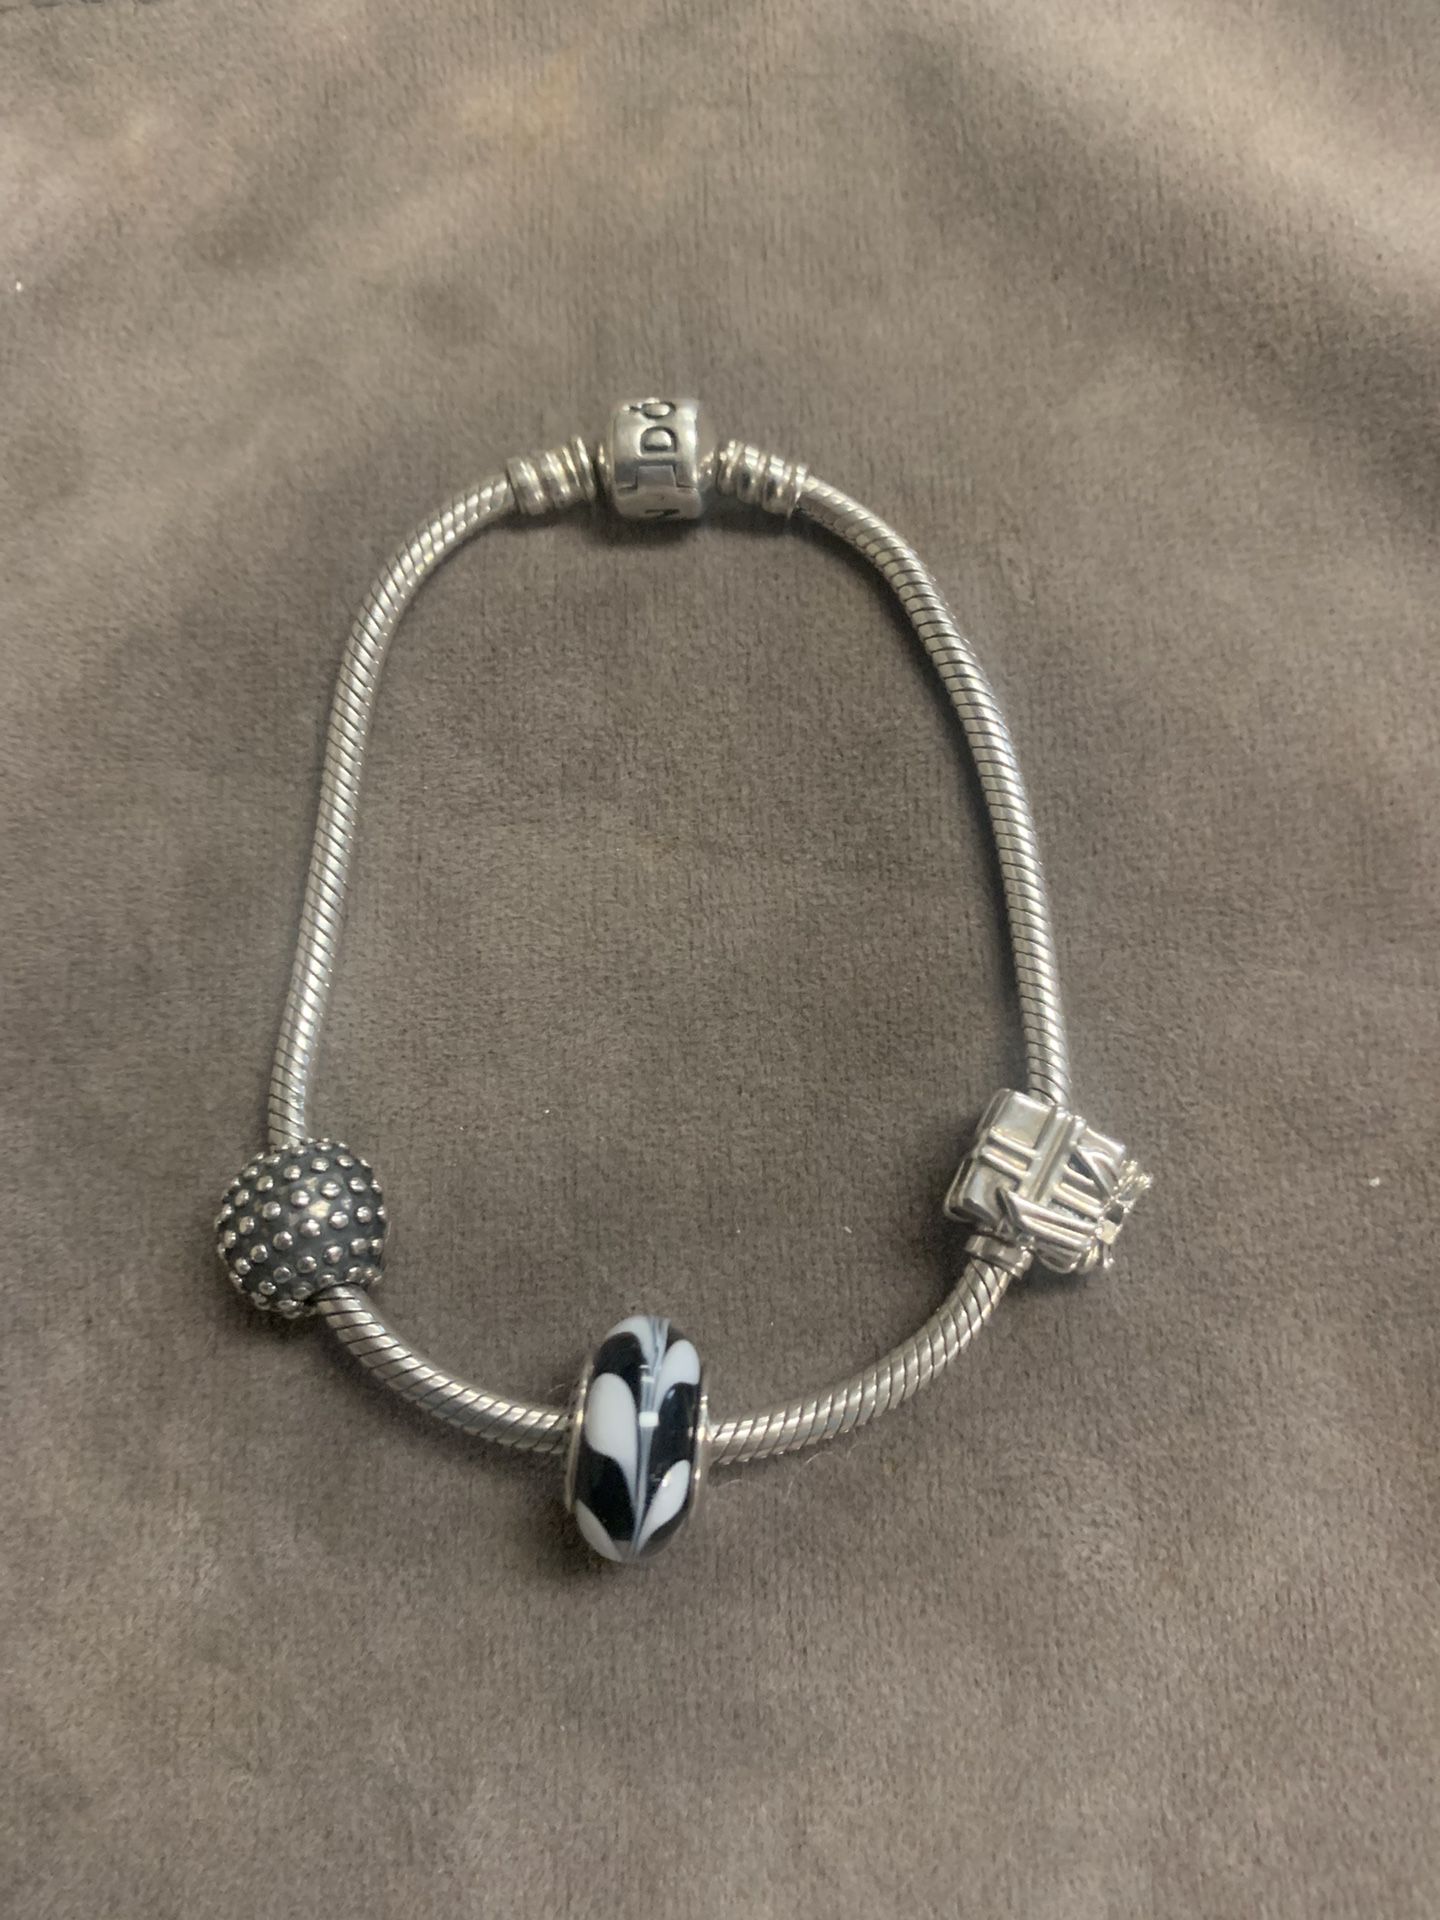 Authentic Silver 925 Pandora With Three Charms Bracelet